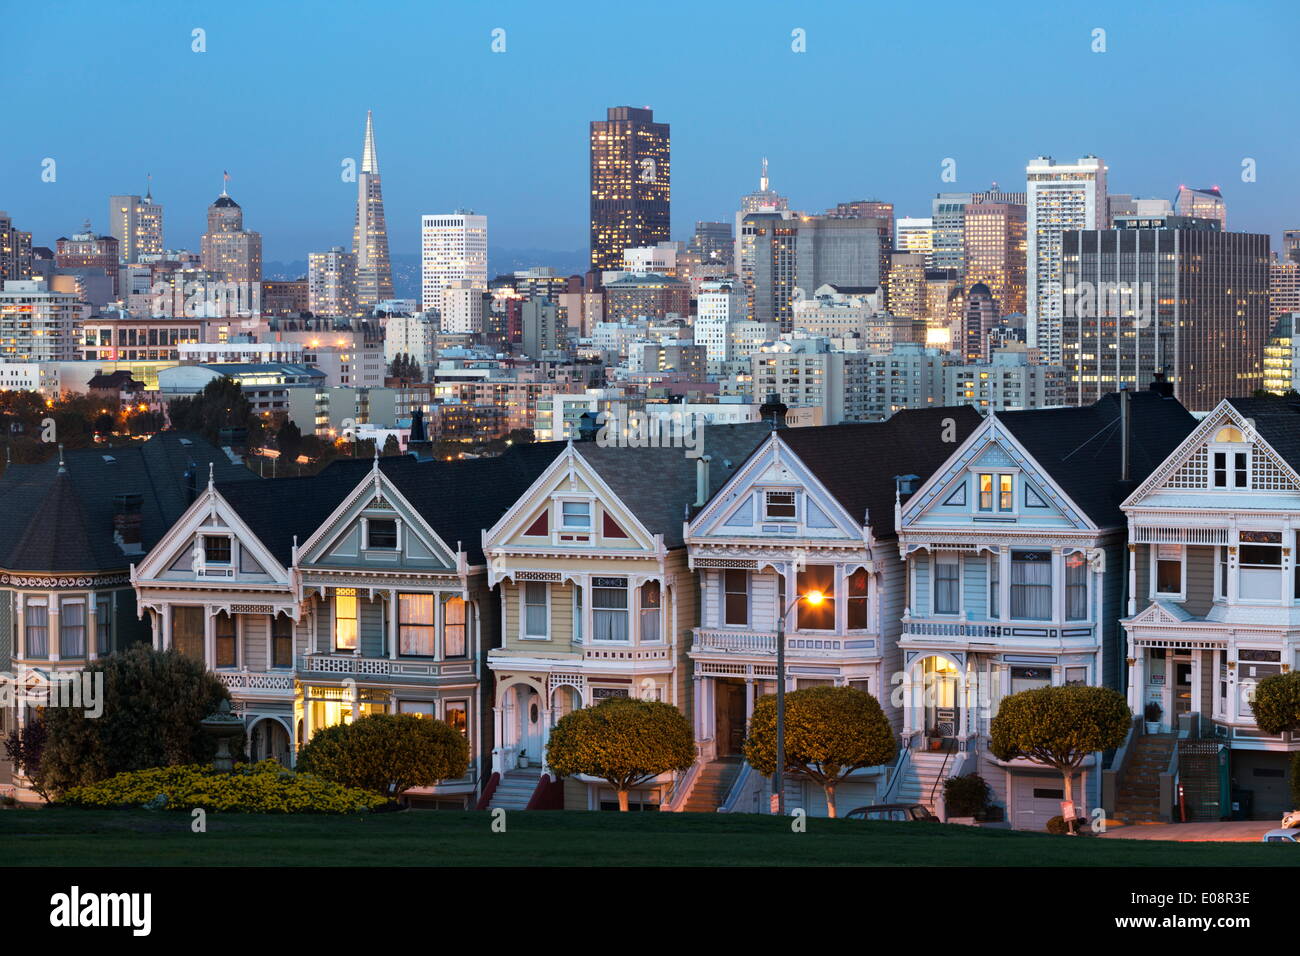 The Painted Ladies and the city at dusk, Alamo Square, San Francisco, California, United States of America, North America Stock Photo